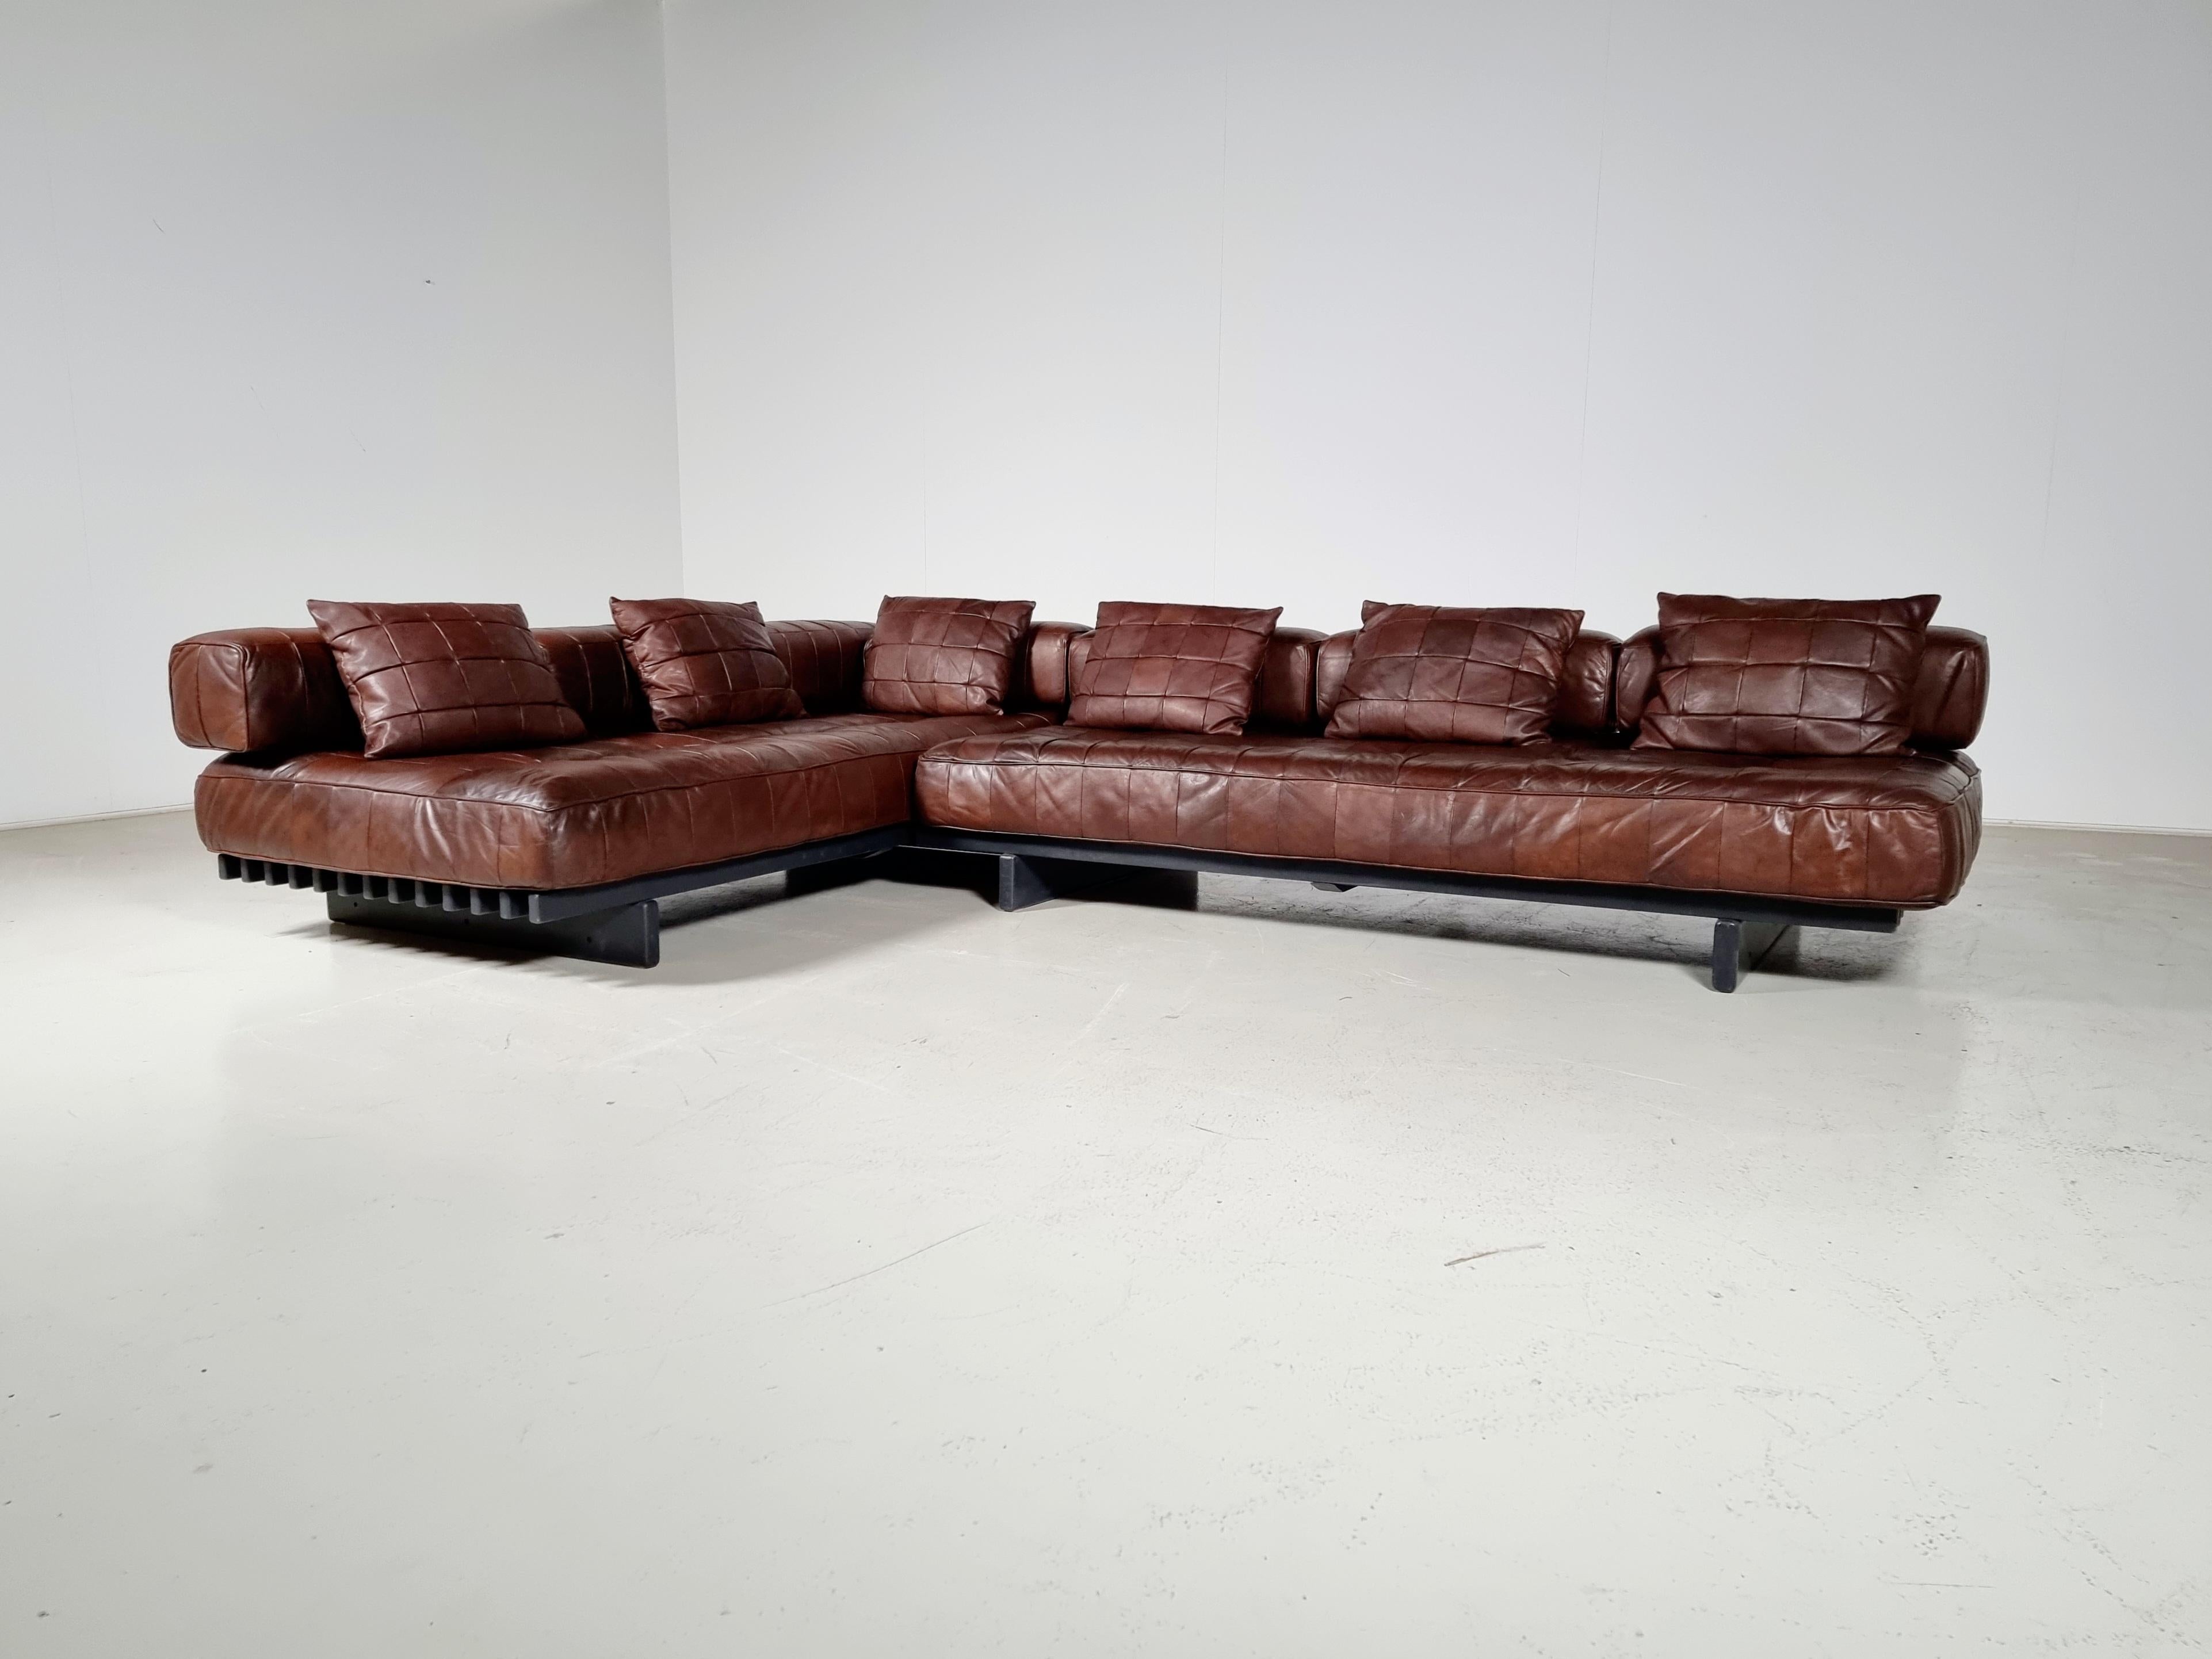 Rare set of 2 Brown leather patchwork De Sede DS80 daybeds with backrests and armrest, Switserland, 1970. Originally upholstered in beautiful and soft aniline leather. The patchwork design of the daybed results in a slightly non-regular pattern of